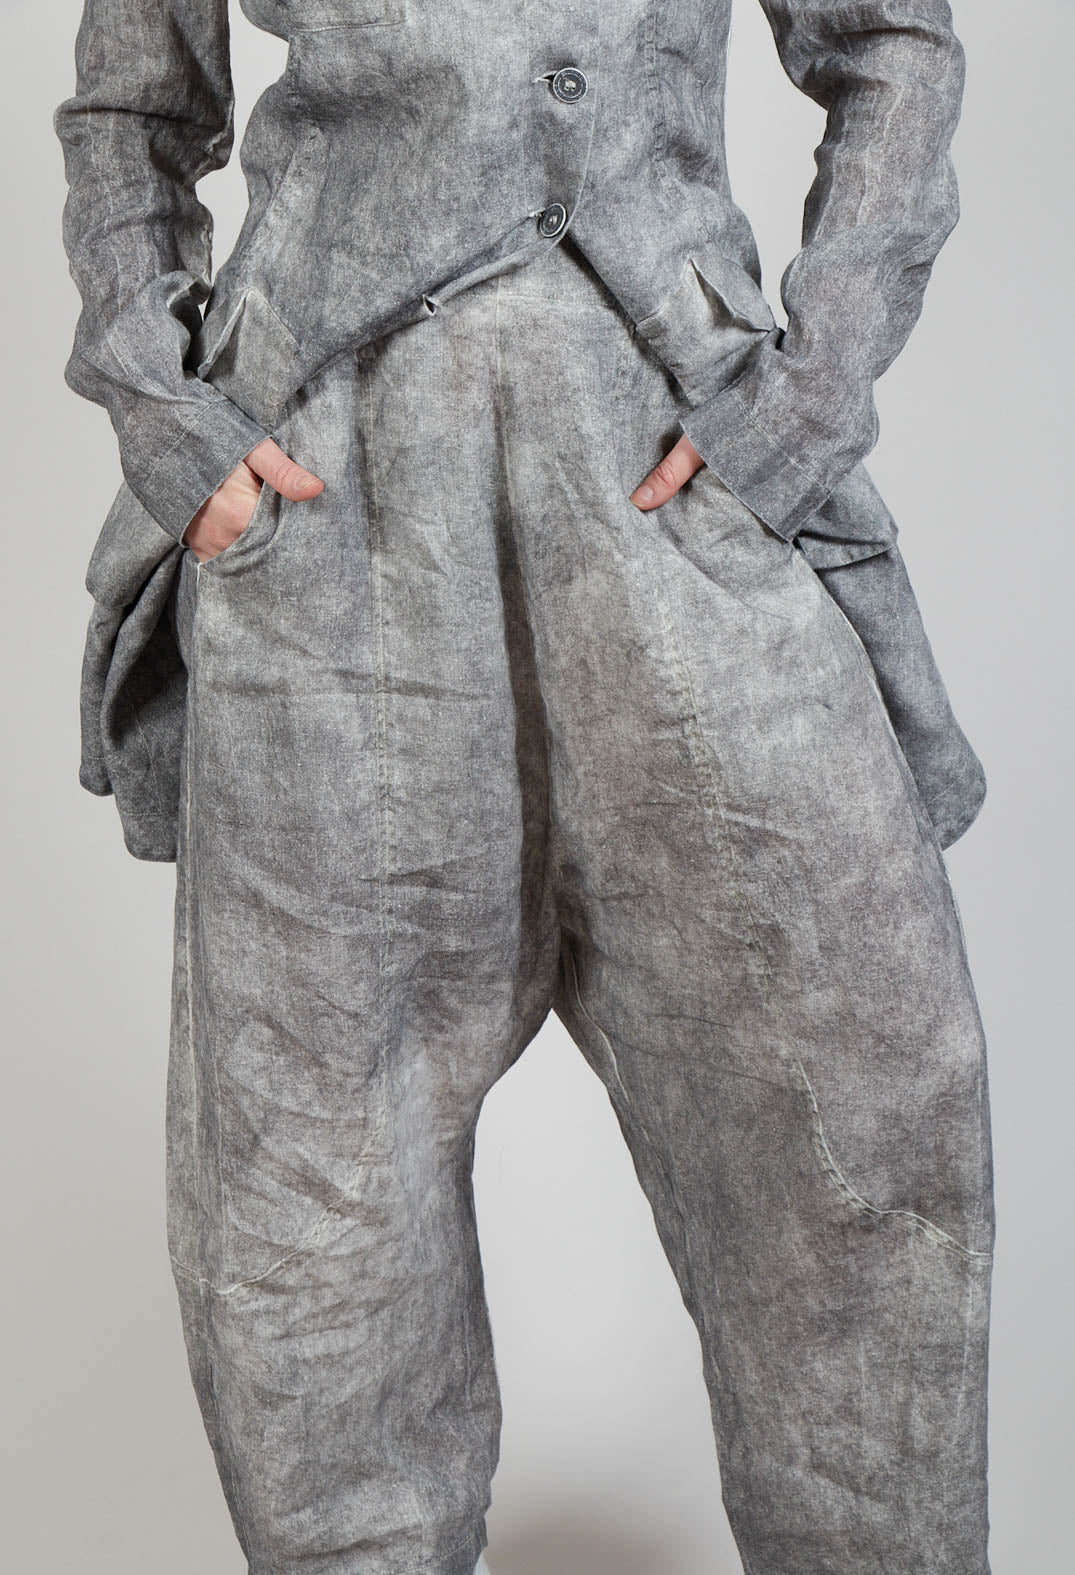 Pull on Egg Shape Trousers in Dark Marble